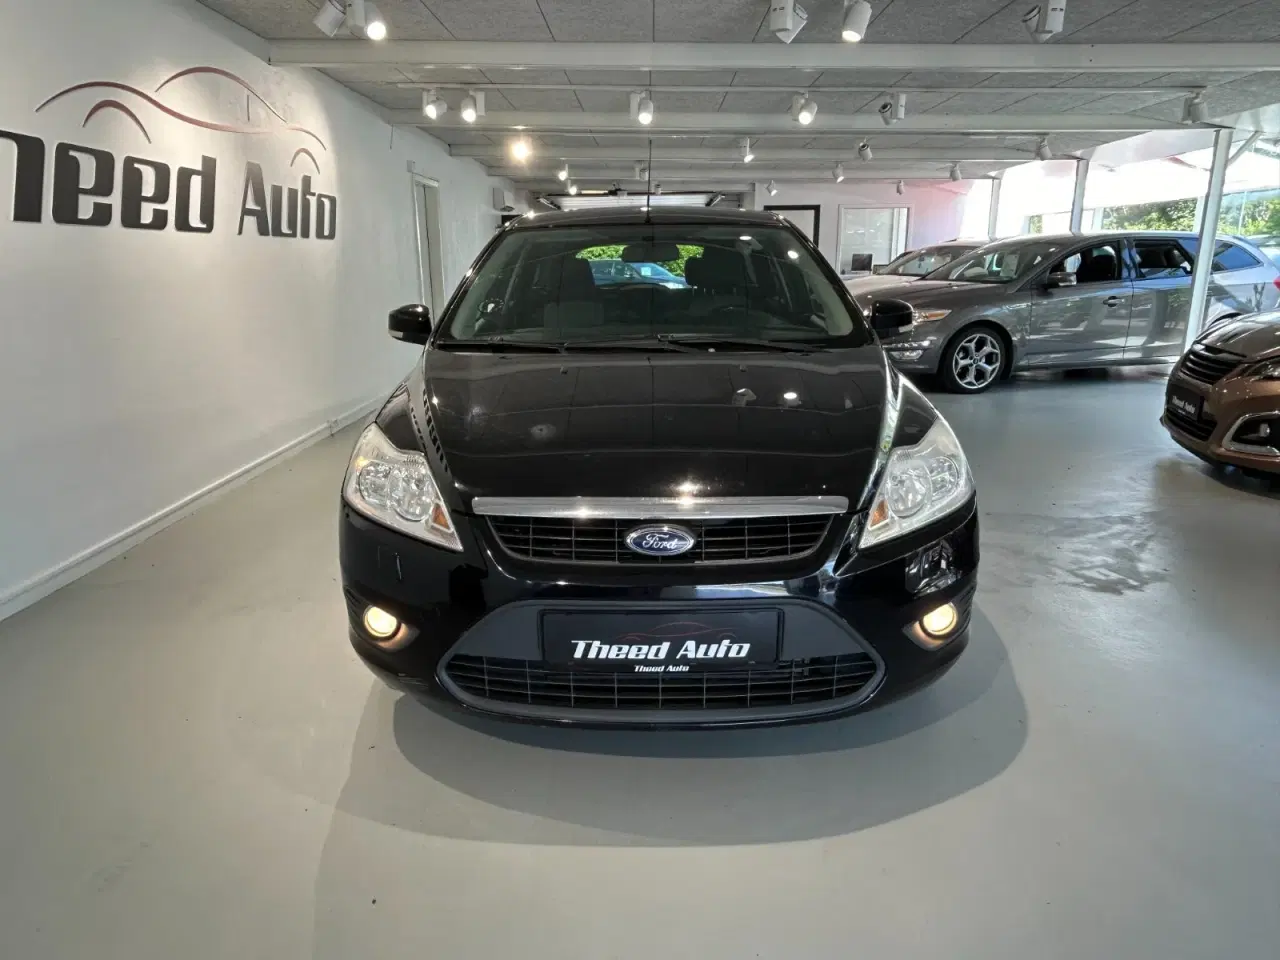 Billede 2 - Ford Focus 1,6 TDCi 109 Trend Collection stc.